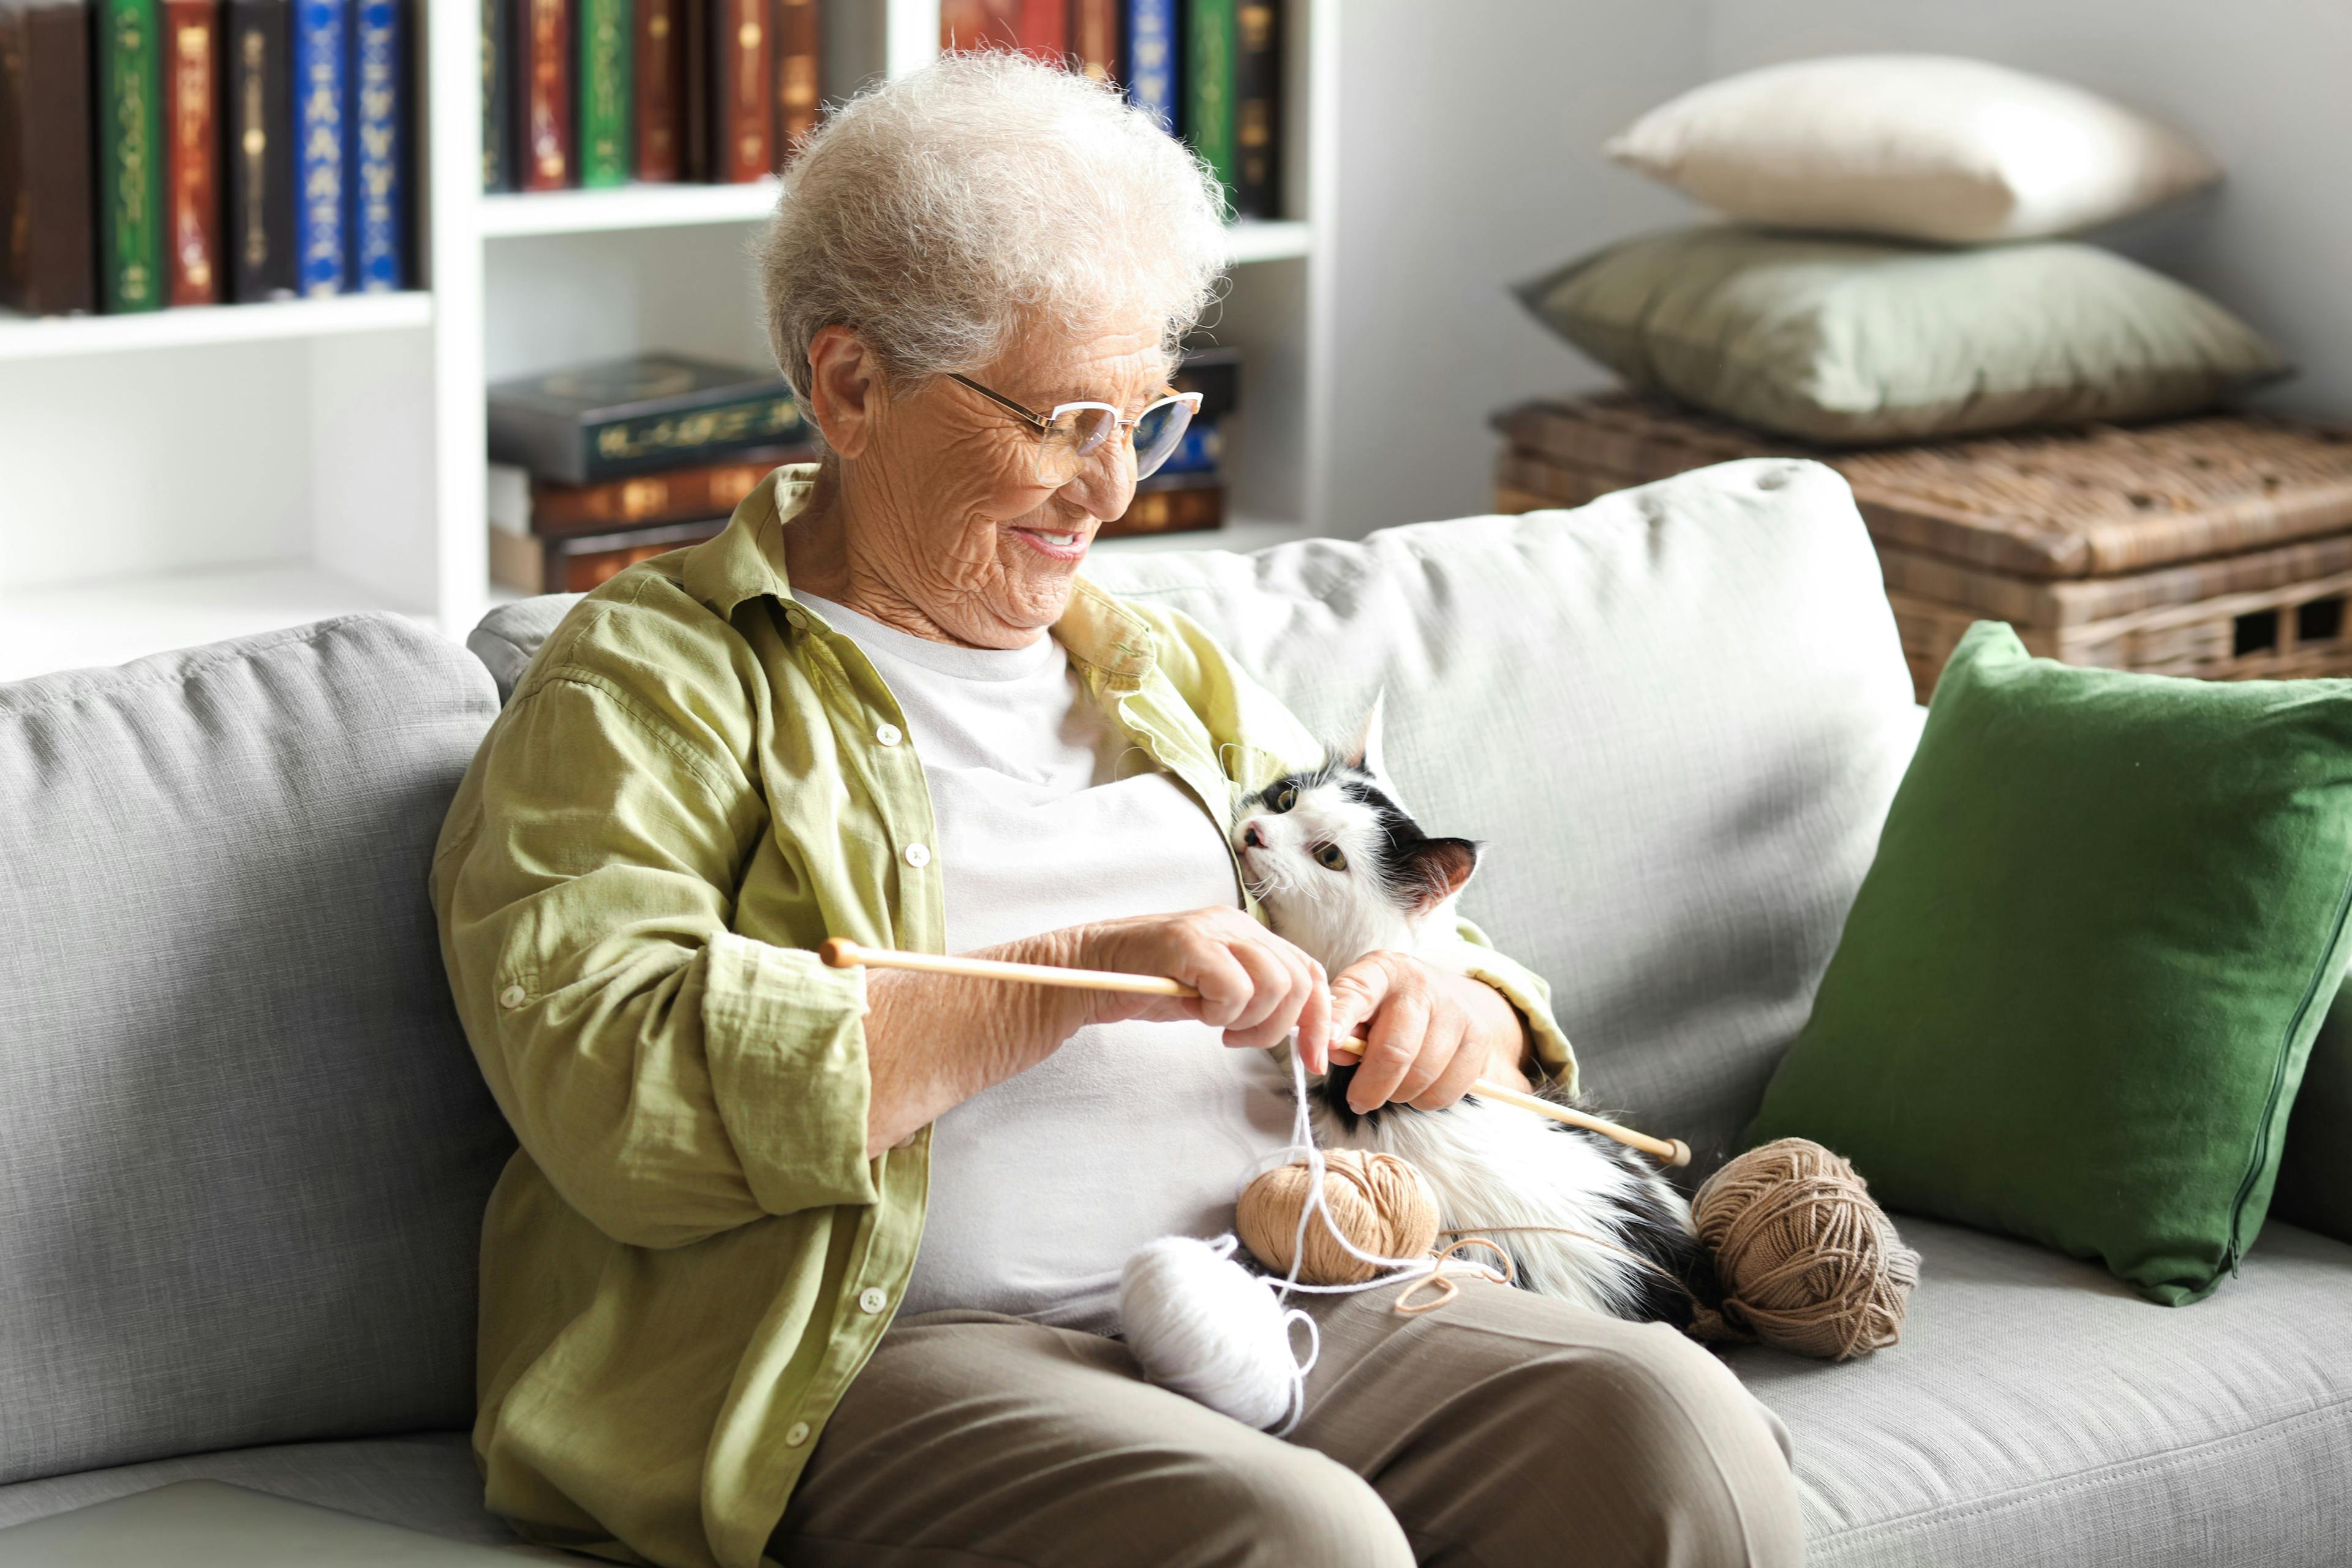 New study finds reduced loneliness in older adults living with fostered cats